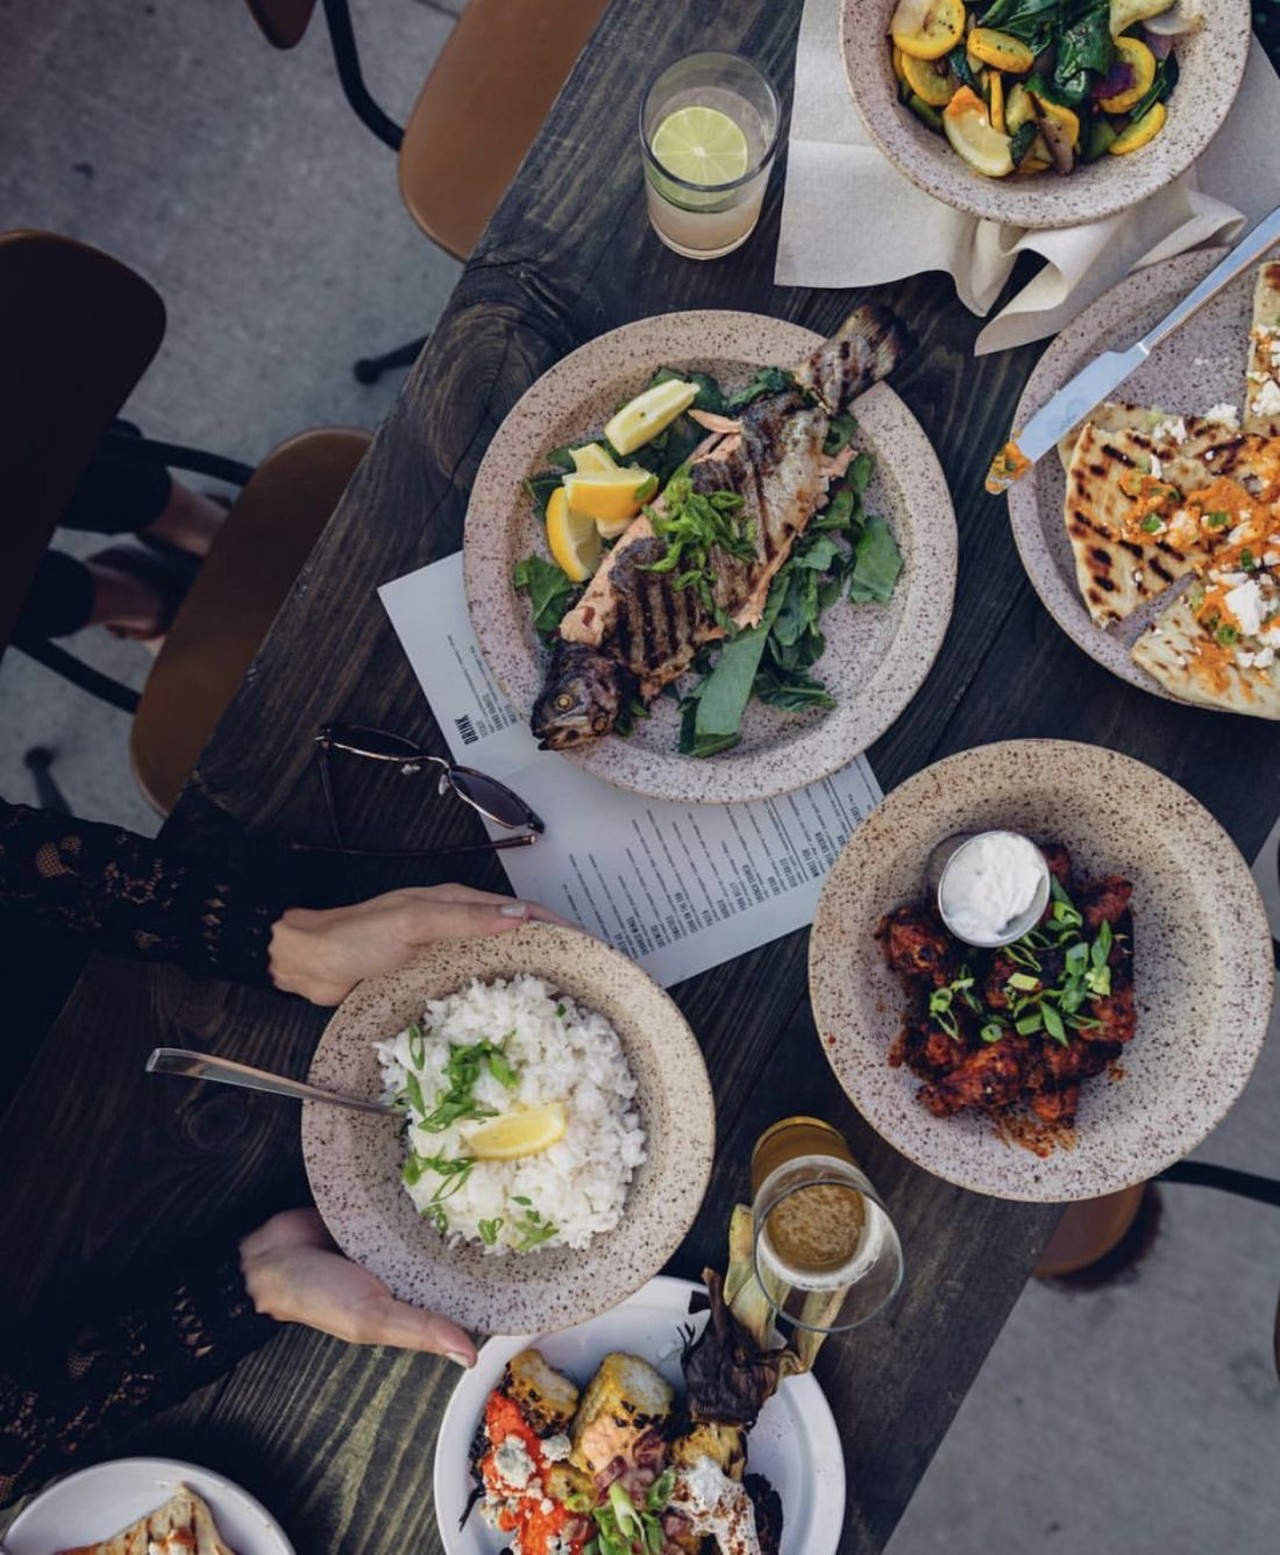 Gather 
1454 Gratiot Ave., Detroit 
Focusing on its affordability, Gather has renovated the concept of dining. For a party of six, one menu item is enough to share and cooked above &#147;campfire&#148; flames. Gather creates the perfect cozy spot near the Eastern Market.
Photo via Instagram user, @christiannkoepke